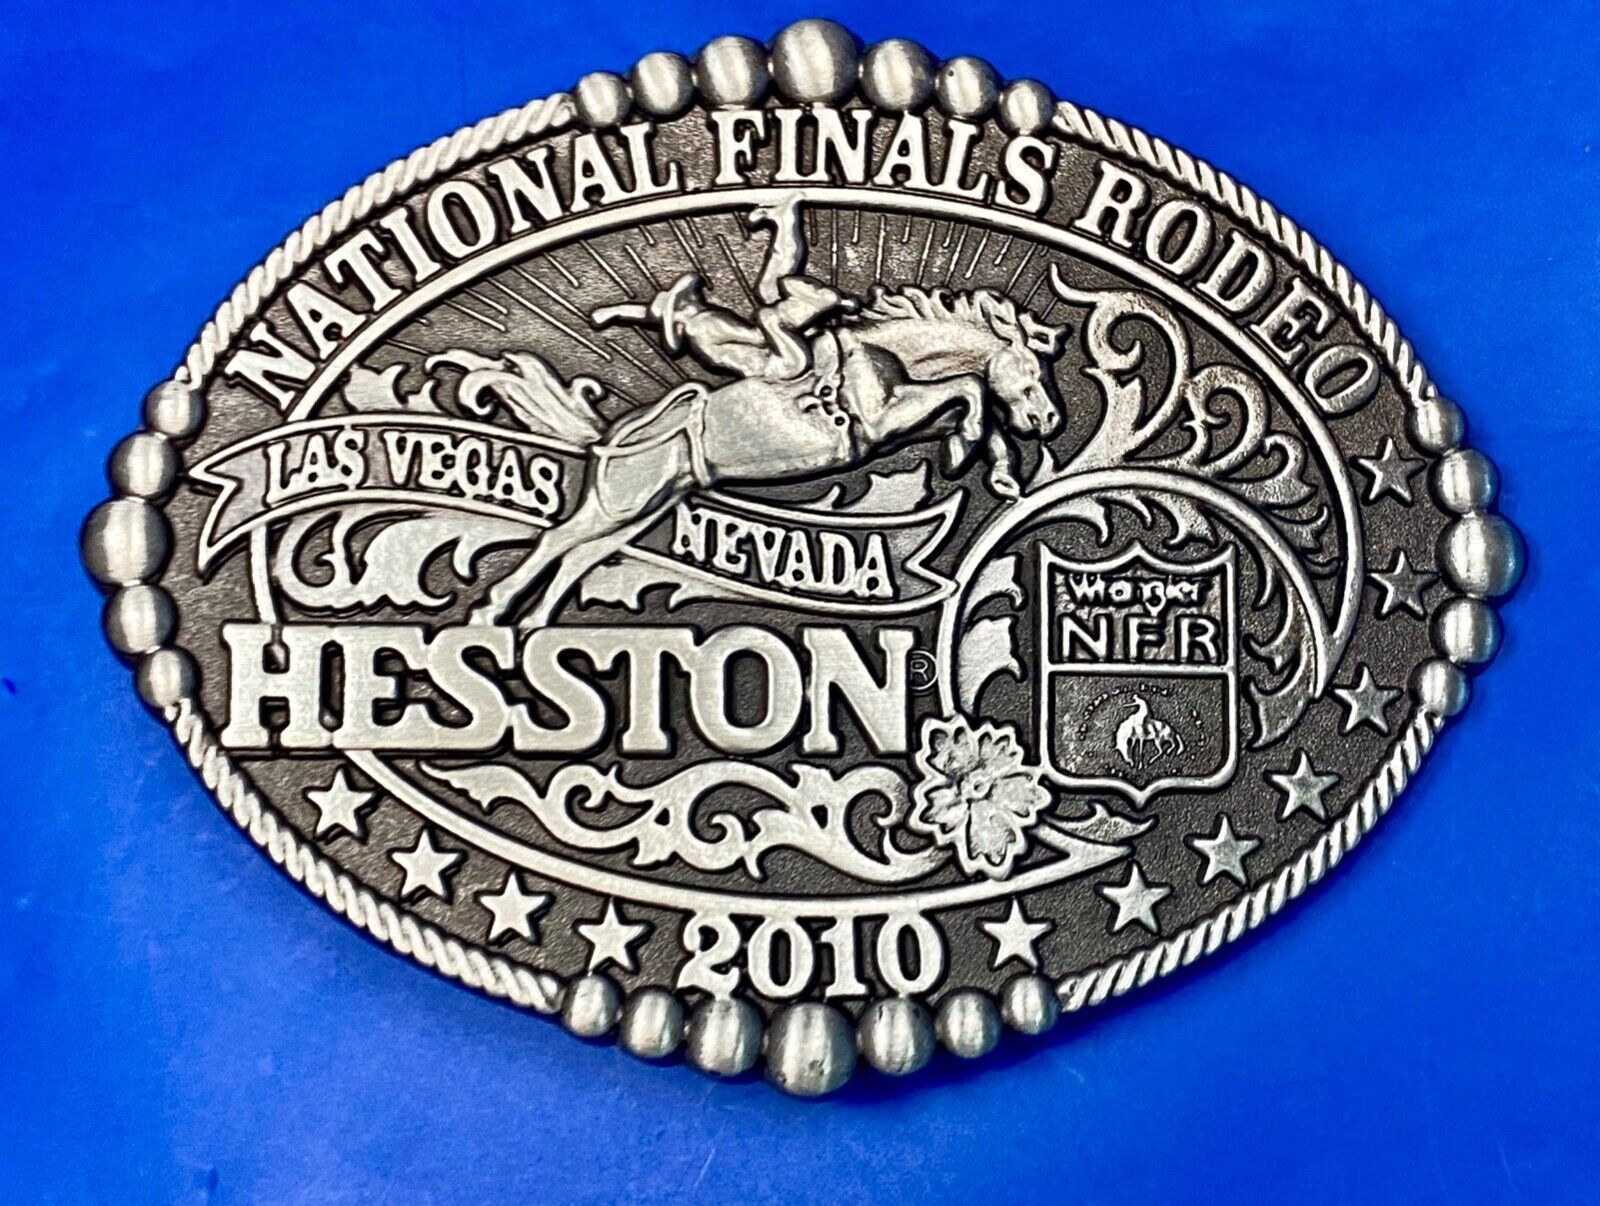 2010 Youth Size NFR National Finals Rodeo PRCA Sealed belt buckle